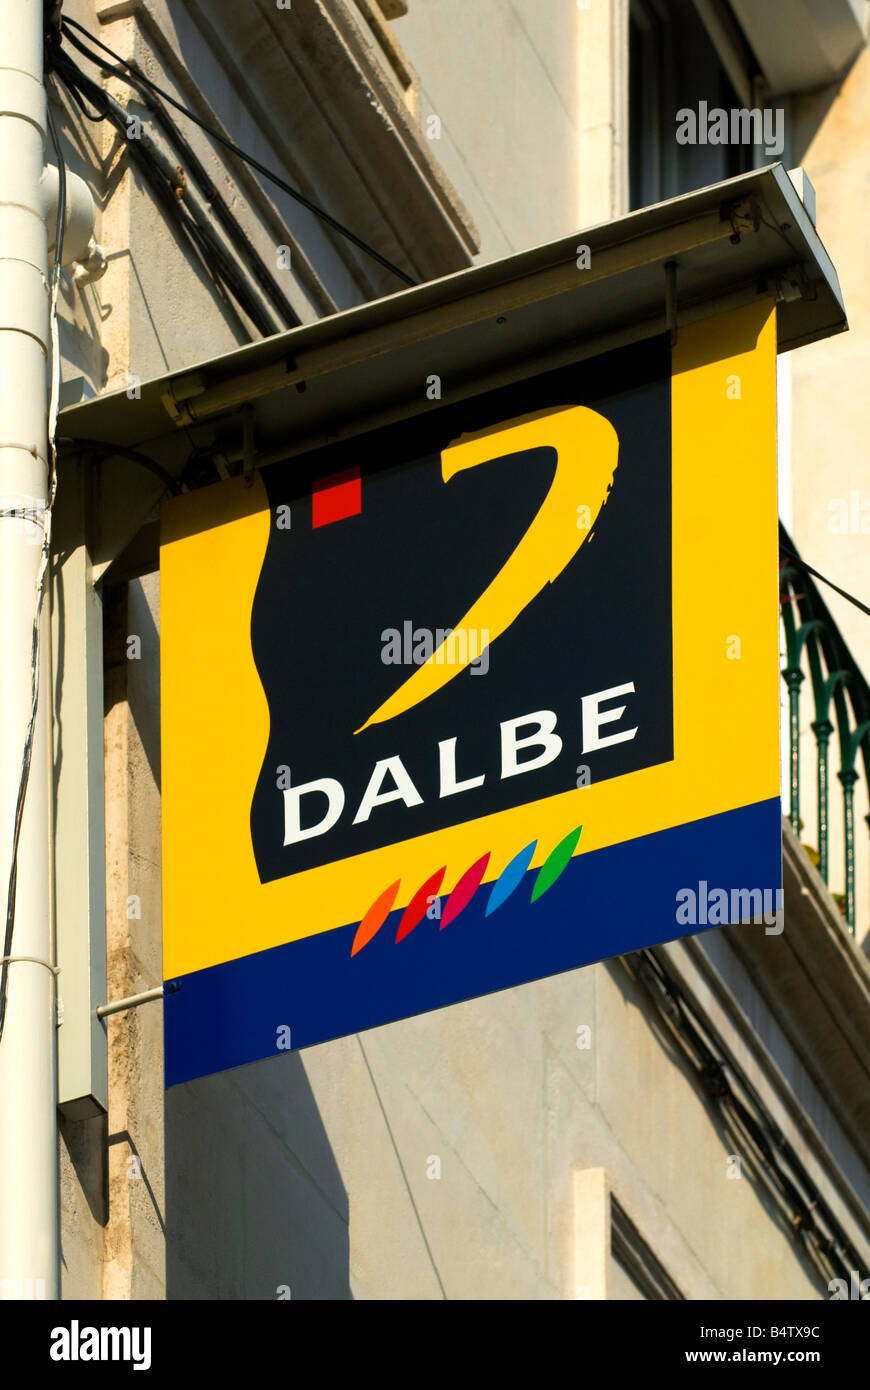 'Dalbe' art supplies shop sign, Poitiers, Vienne, France. Stock Photo